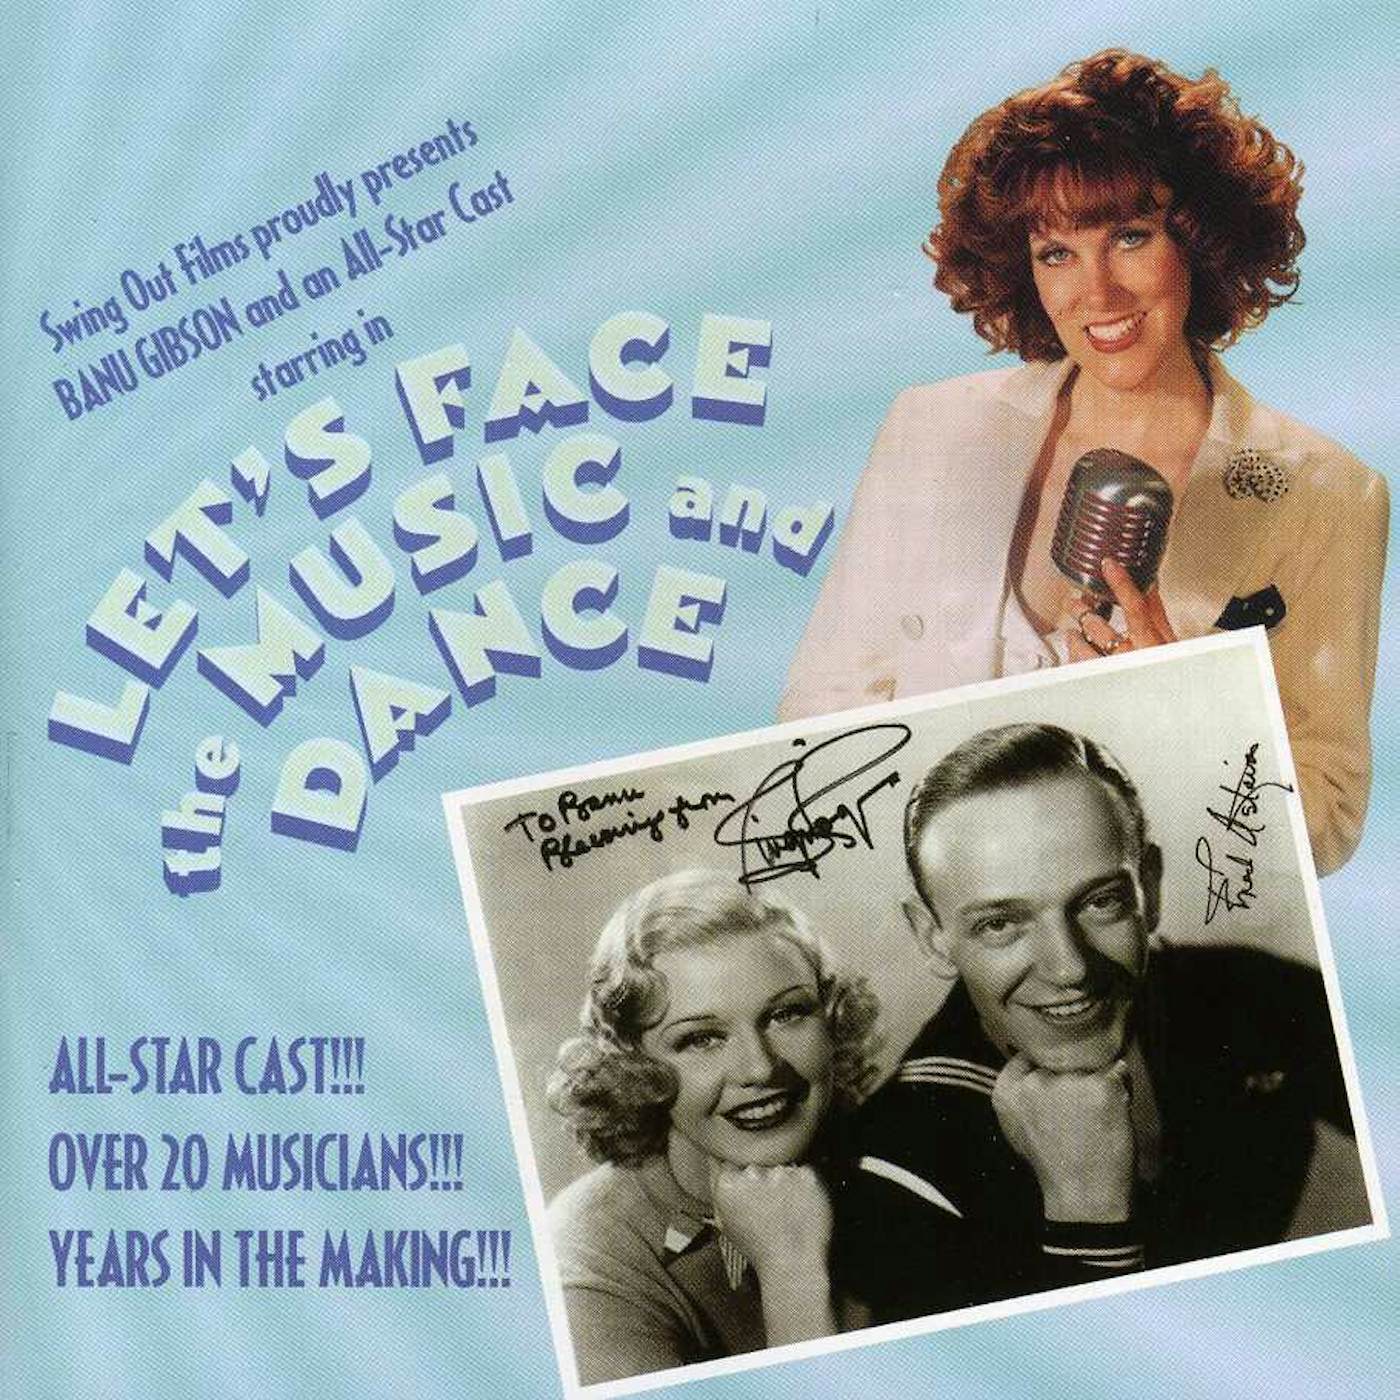 Banu Gibson LET'S FACE THE MUSIC & DANCE CD